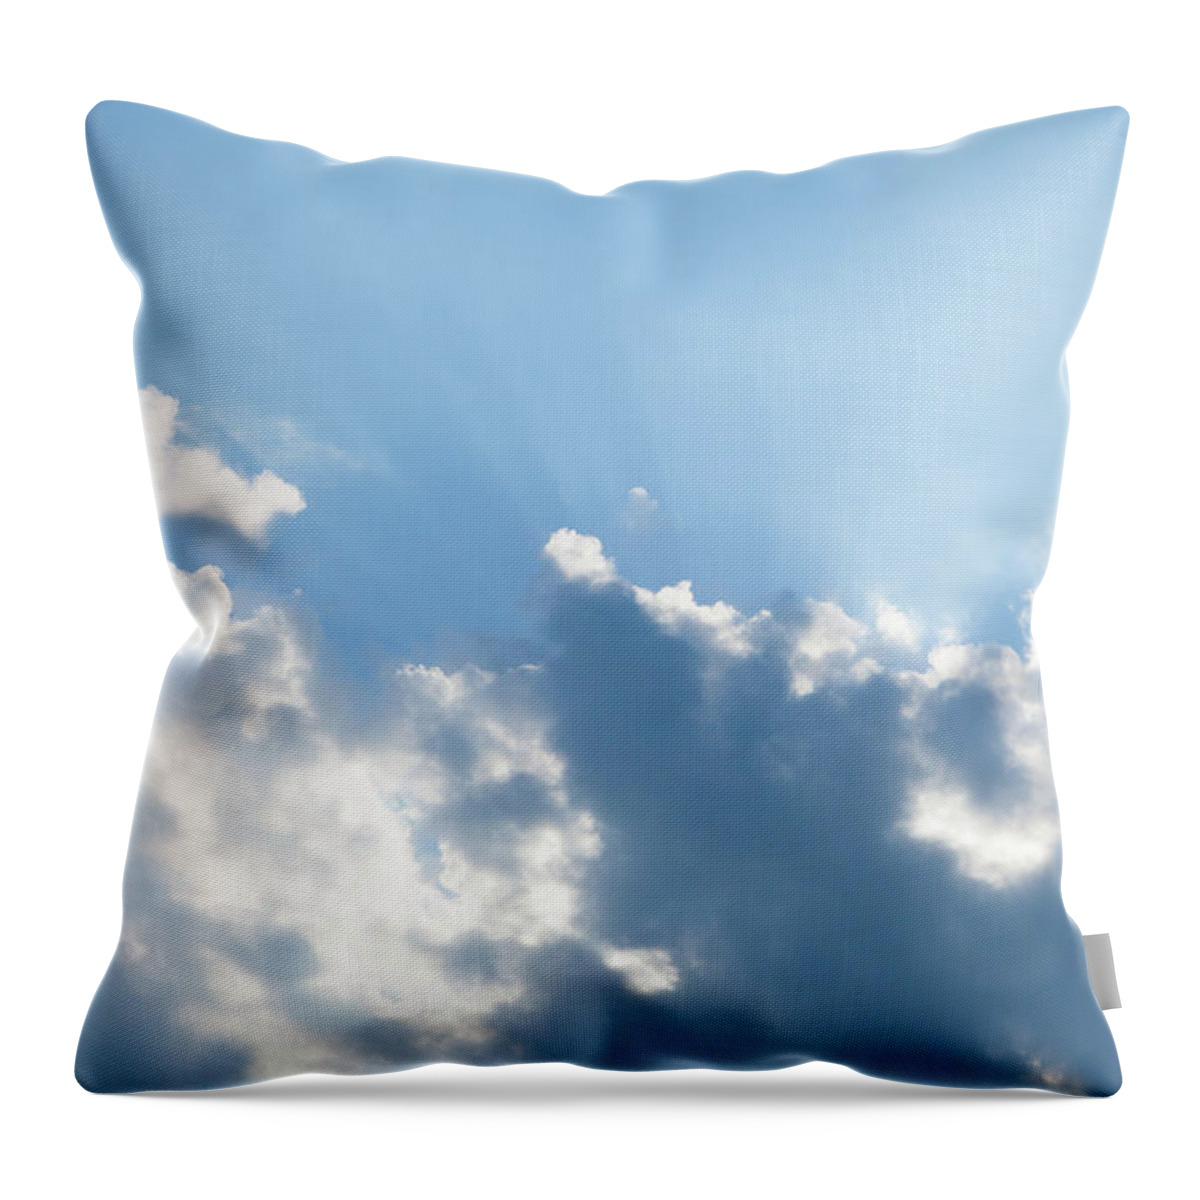 Clouds Throw Pillow featuring the photograph Clouds_6871 by Rocco Leone